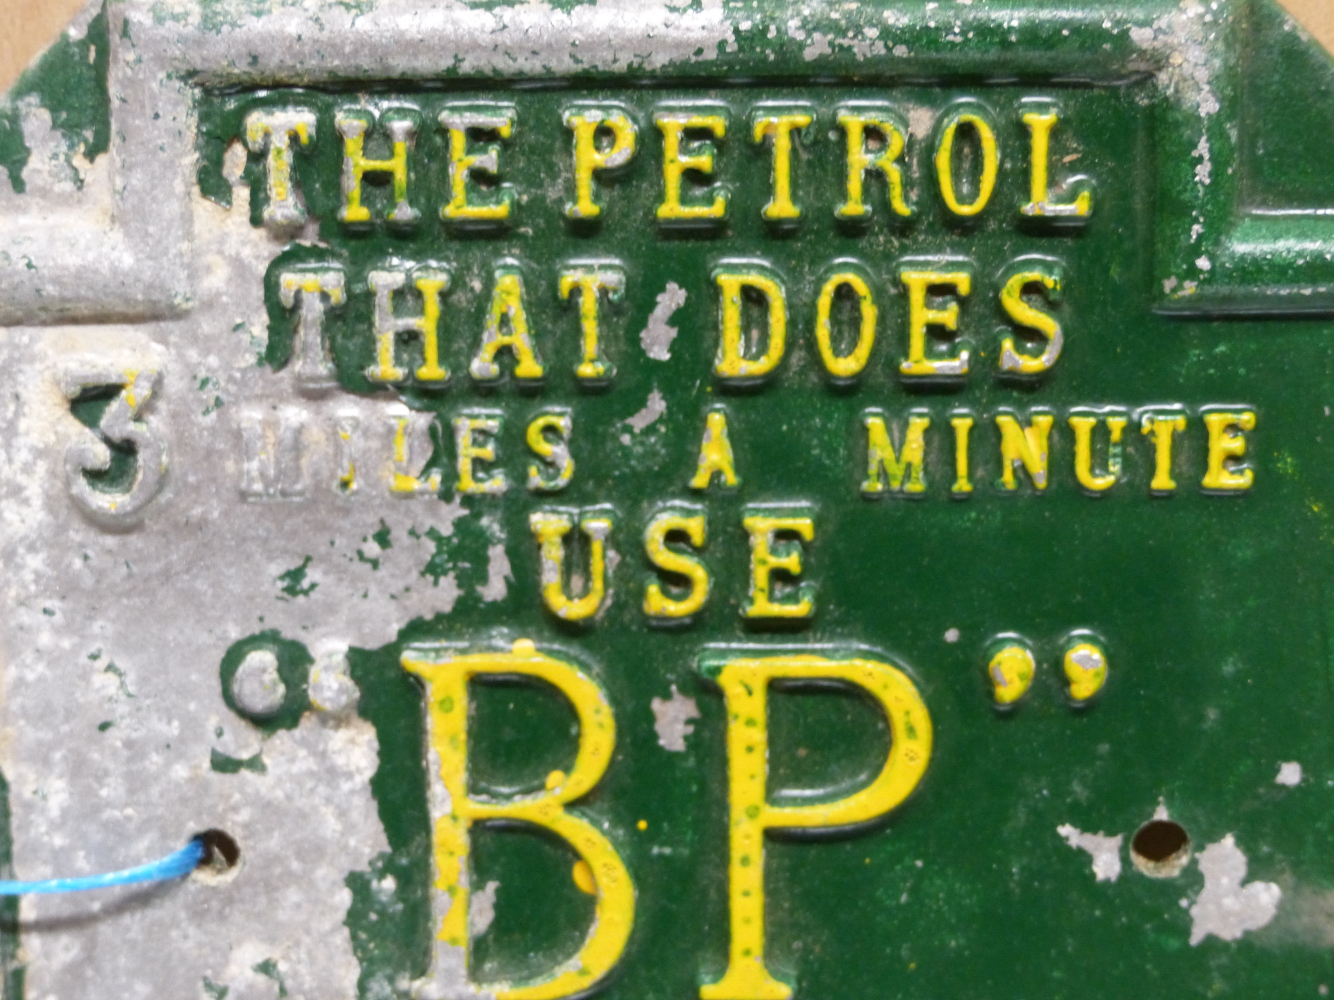 A GREEN AND YELLOW PAINTED HEXAGONAL ALUMINIUM BP ADVERTISING PLAQUE, THE PETROL THAT DOES 3 MILES A - Image 2 of 7